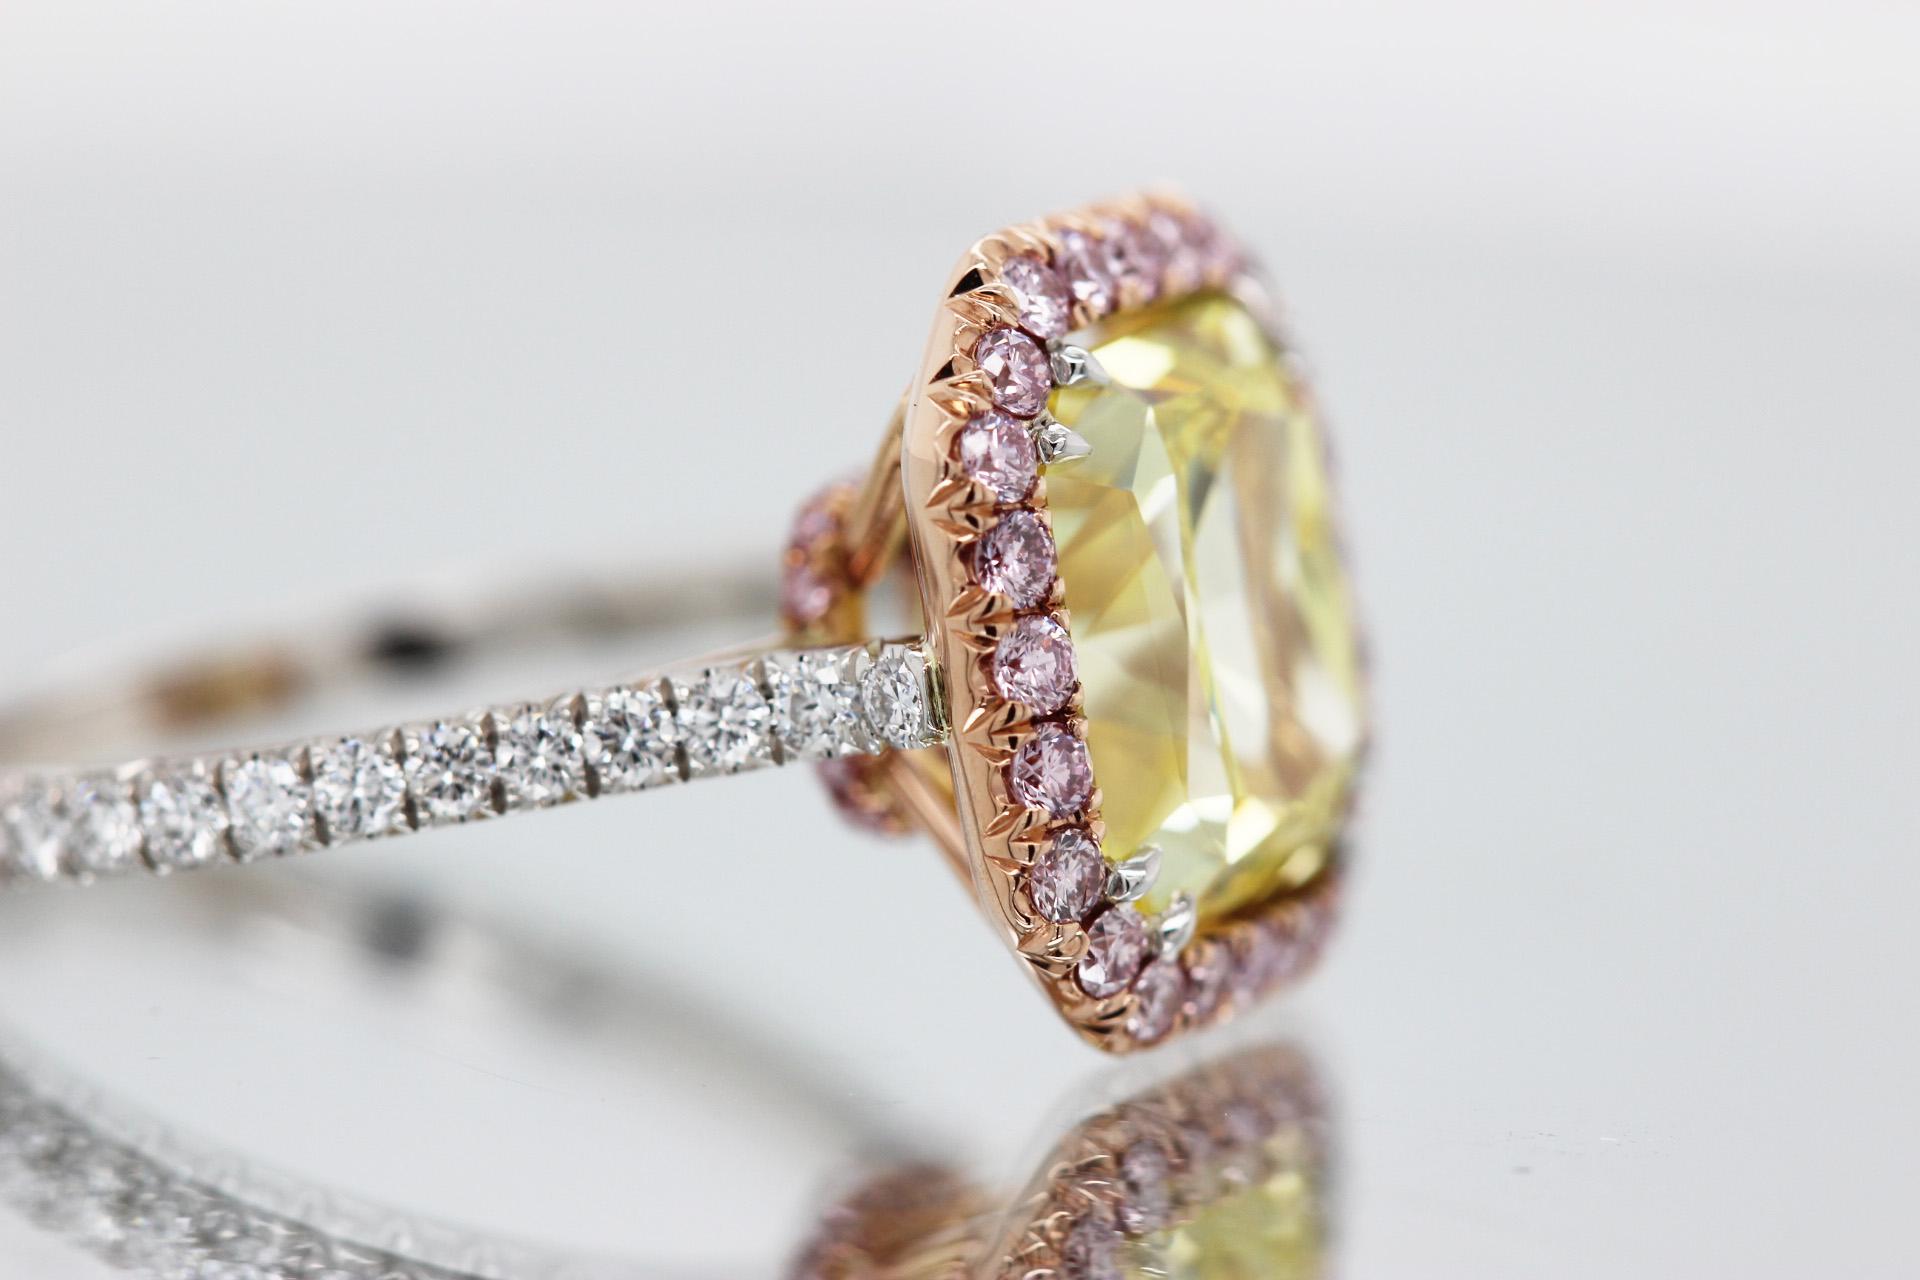 GIA-certified 5+ carat Fancy Vivid Yellow radiant-cut natural diamond engagement ring set in platinum and 18k rose gold. Natural Fancy Pink diamond halo engagement ring with 5.07 carat radiant cut Fancy Vivid Yellow center stone.

Perfect for lovers